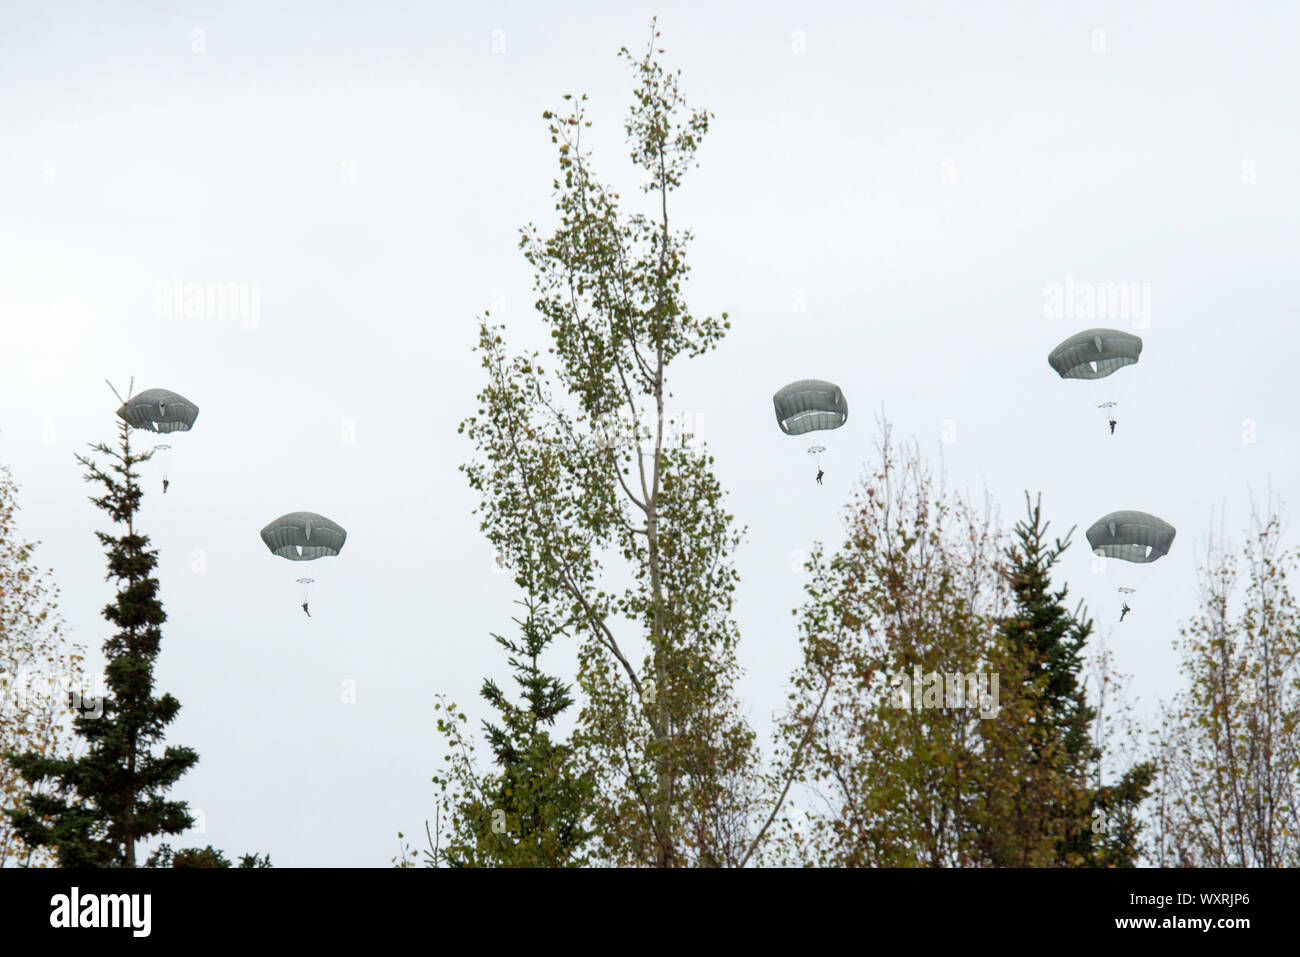 Army paratroopers with the 4th Infantry Brigade Combat Team (Airborne), 25th Infantry Division, U.S. Army Alaska, descend over Malemute Drop Zone after jumping from an Air Force C-130J Super Hercules during airborne operations at Joint Base Elmendorf-Richardson, Alaska, Sept. 16, 2019. The Soldiers of 4/25 belong to the only American airborne brigade in the Pacific and are trained to execute airborne maneuvers in extreme cold weather and high altitude environments in support of combat, partnership and disaster relief operations. (U.S. Air Force photo by Alejandro Peña) Stock Photo